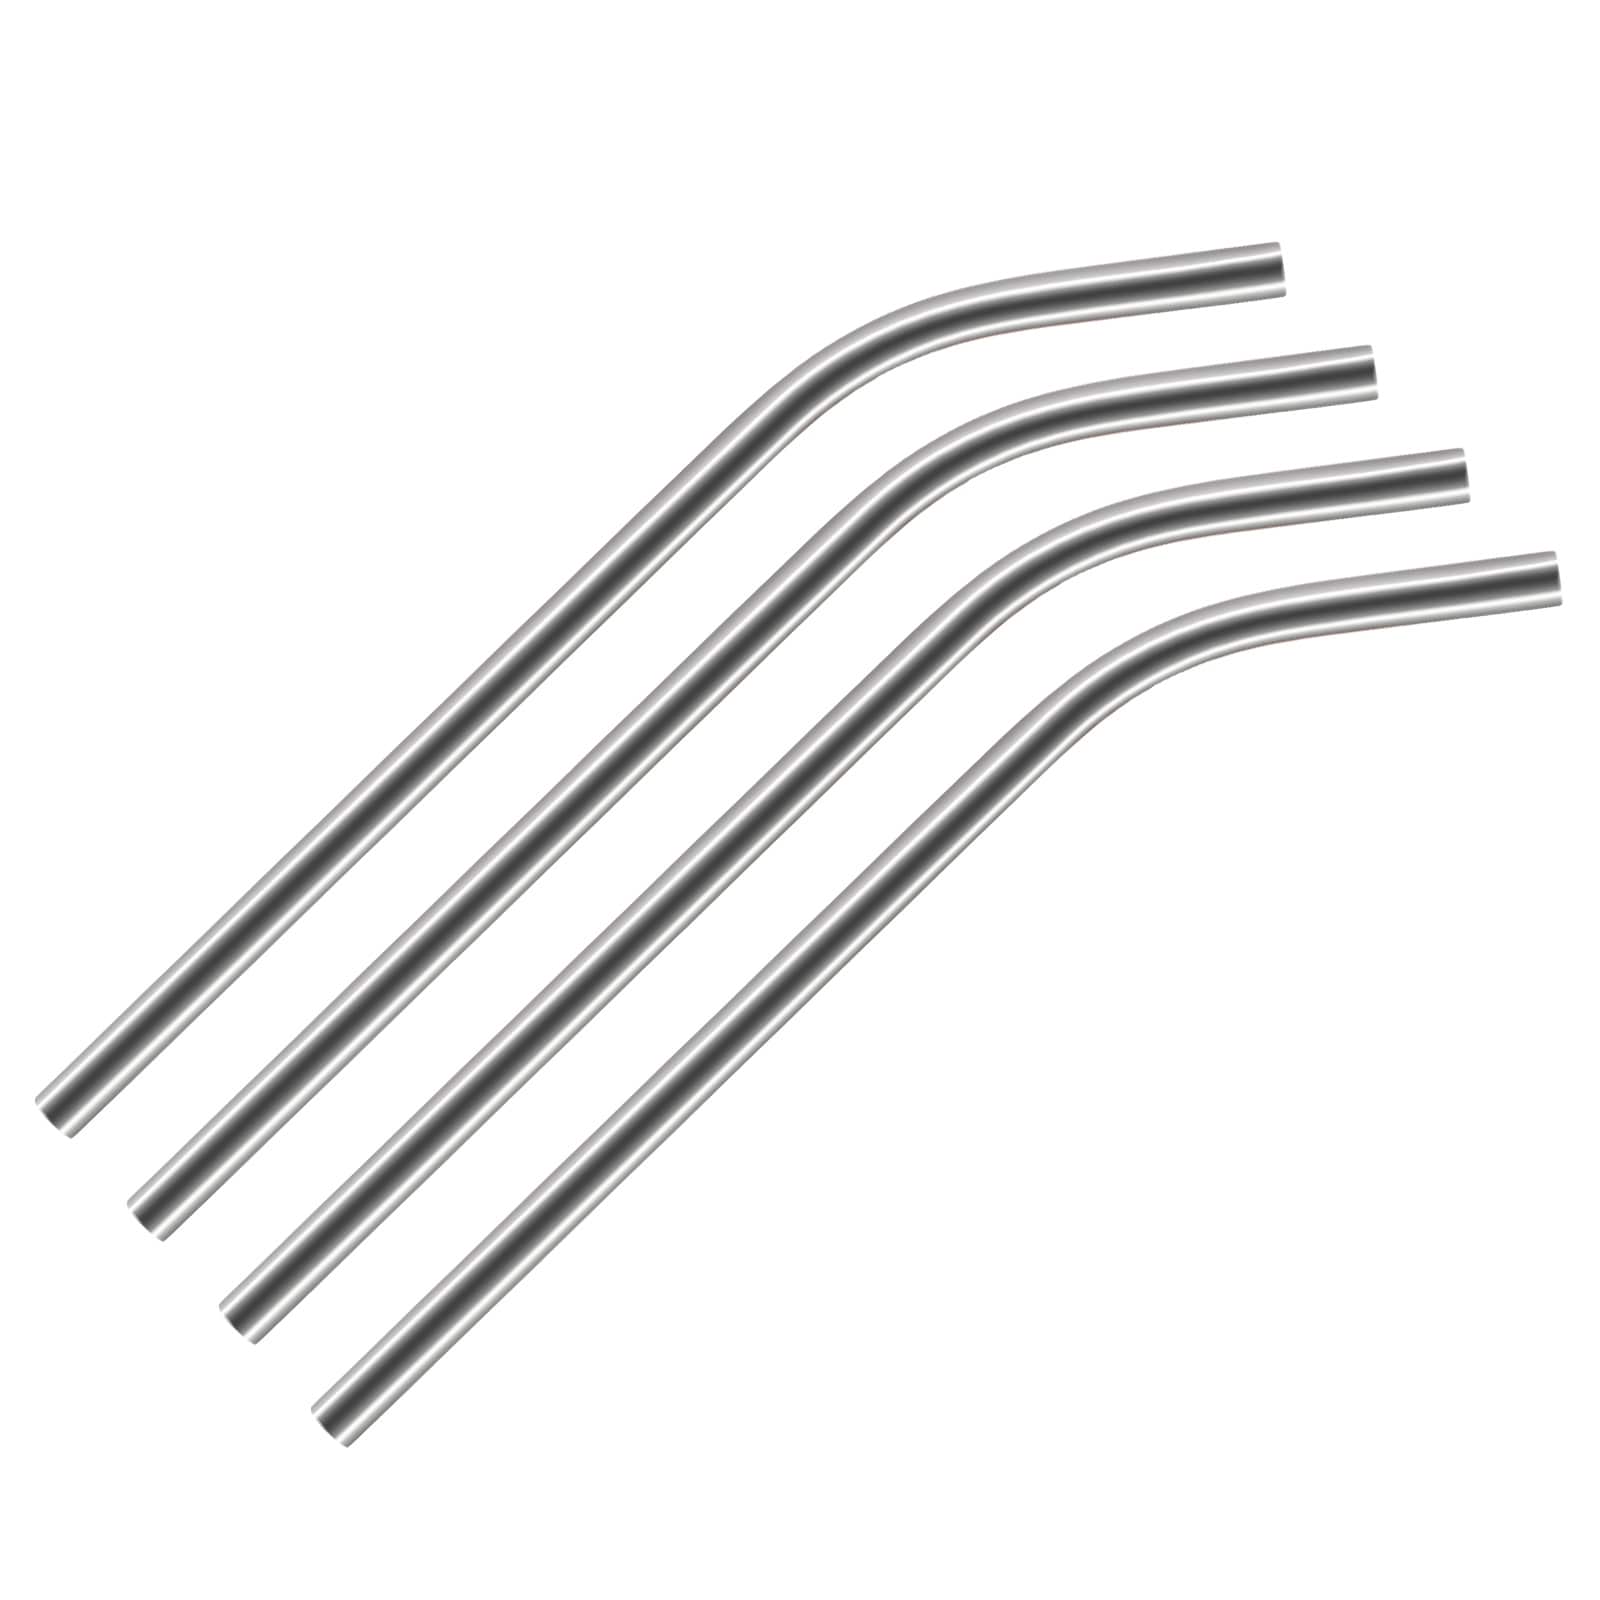 14 Piece 8.5 Inch Reusable Stainless Steel Straws Steel Metal Drinking  Straws